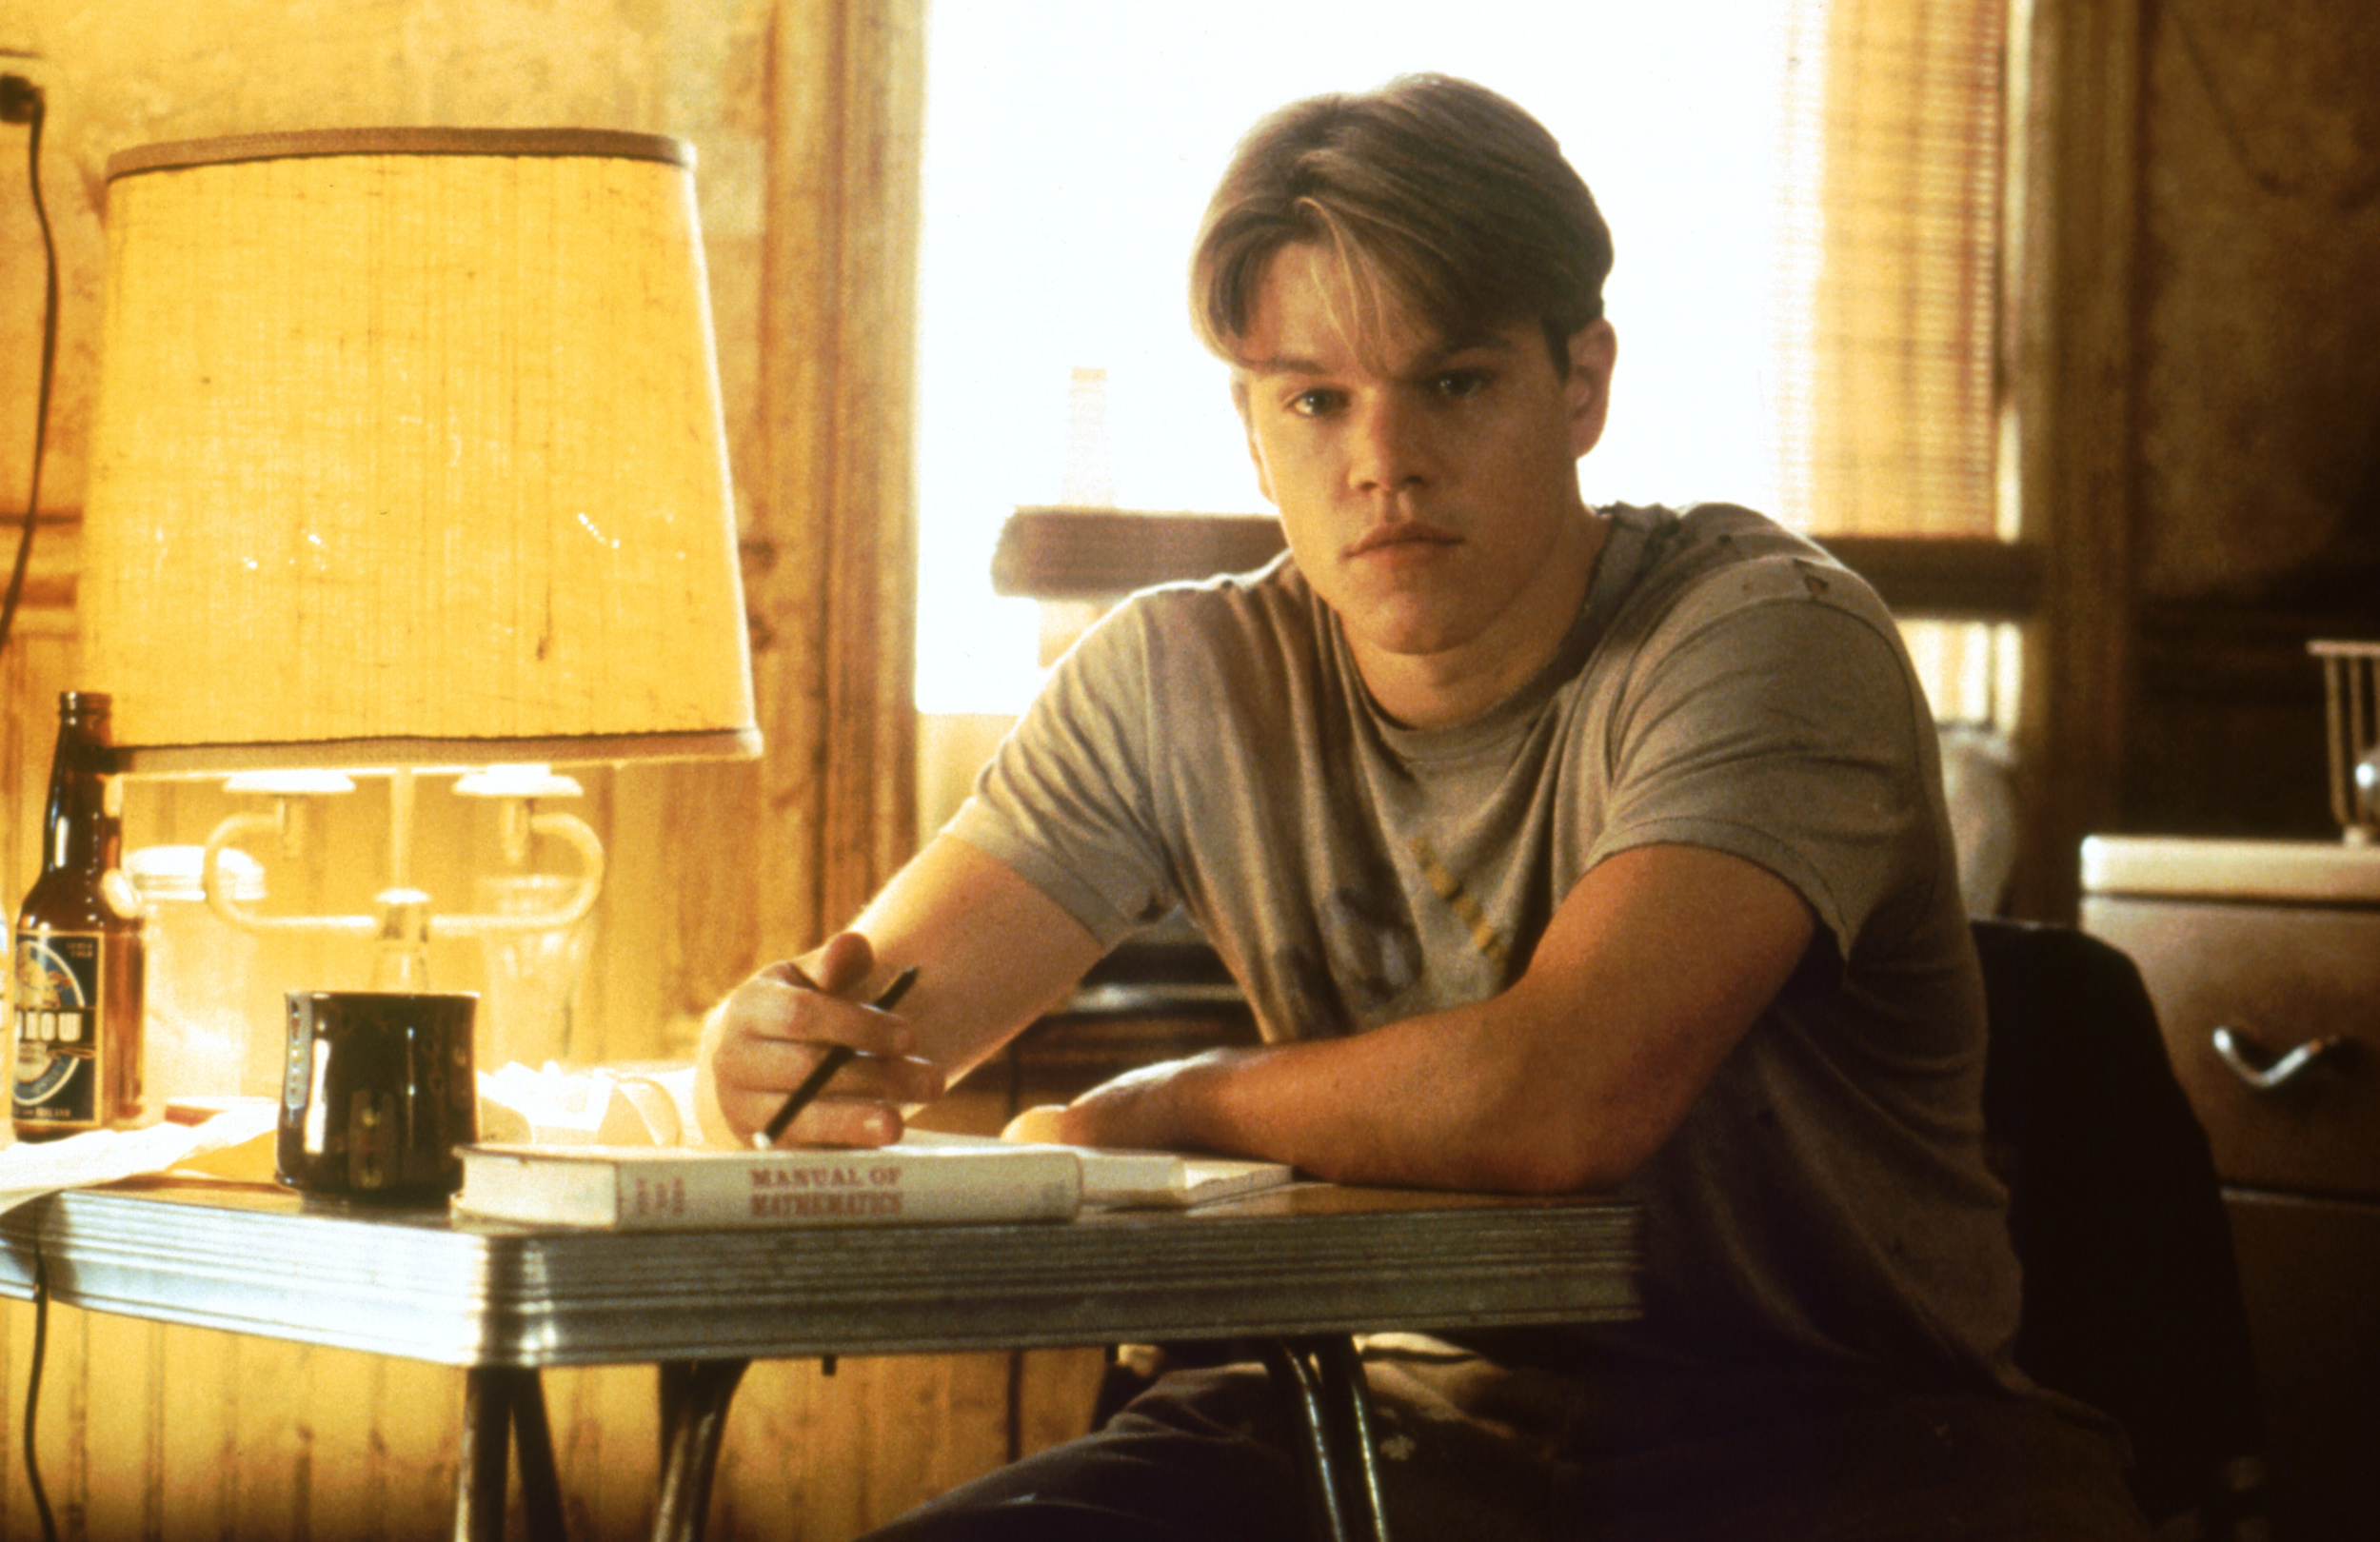 <p>Famously Affleck and Damon wrote the script together, but it was not always a project for both of them. In fact, “Good Will Hunting” was originally just Damon’s project. Also, it wasn’t so much a “project” as a school assignment. Damon had to write a play for his playwriting class at Harvard but instead turned out a 40-page script. After that, Damon brought Affleck on board to help him flesh it out, and they finished the first version of the script in 1994.</p><p>You may also like: <a href='https://www.yardbarker.com/entertainment/articles/20_most_viewed_tv_series_finales_020524/s1__39839553'>20 most-viewed TV series finales</a></p>